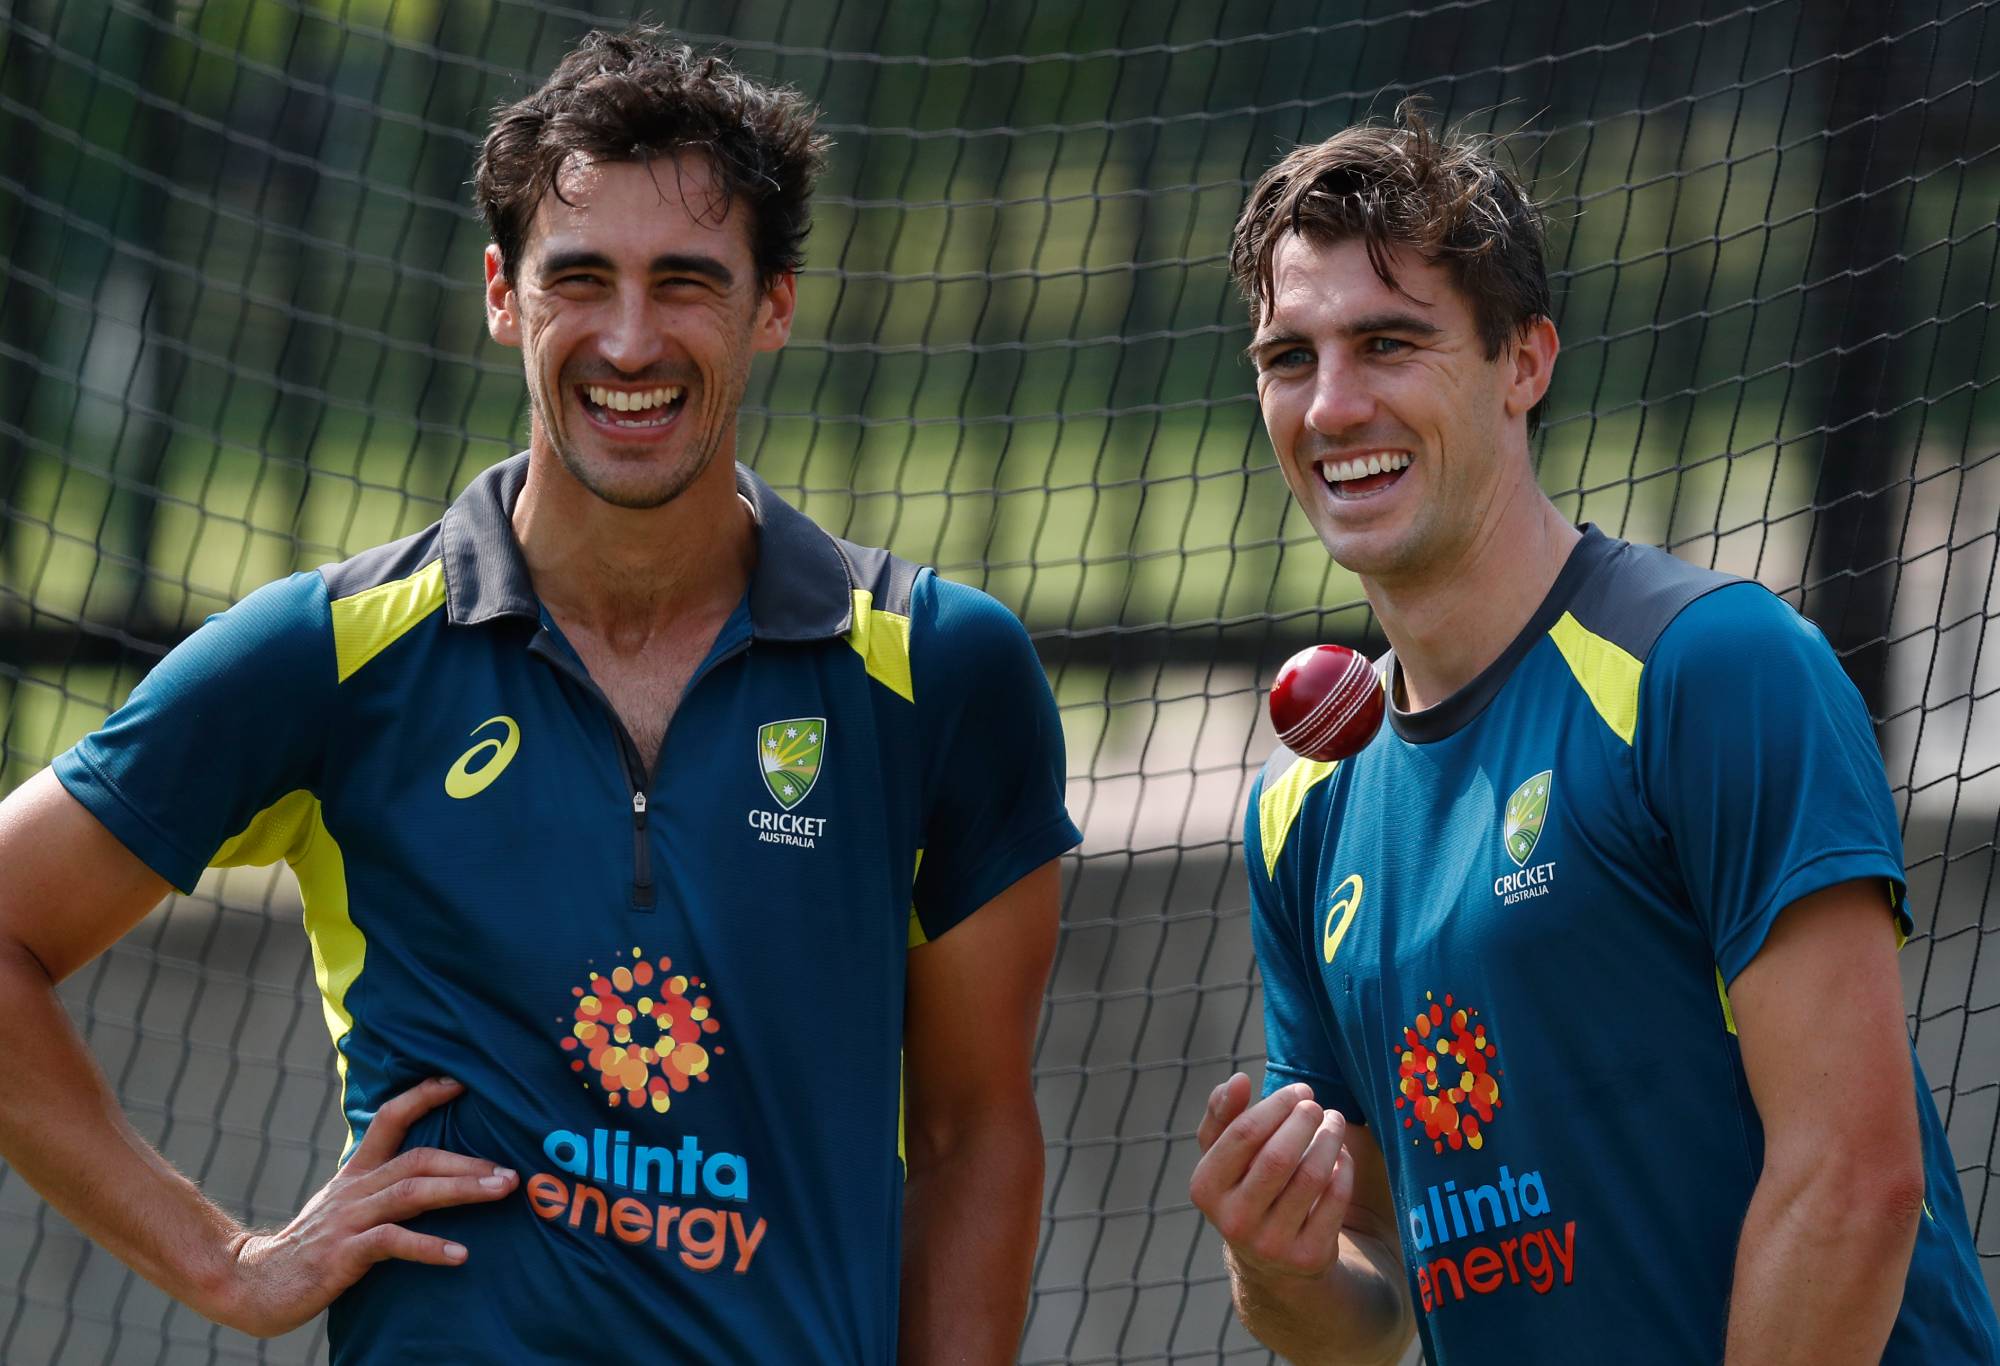 MELBOURNE, AUSTRALIA - DECEMBER 23: Mitchell Starc and Pat Cummins of Australia share a laugh during an Australia nets session at the Melbourne Cricket Ground on December 23, 2019 in Melbourne, Australia. (Photo by Darrian Traynor/Getty Images)